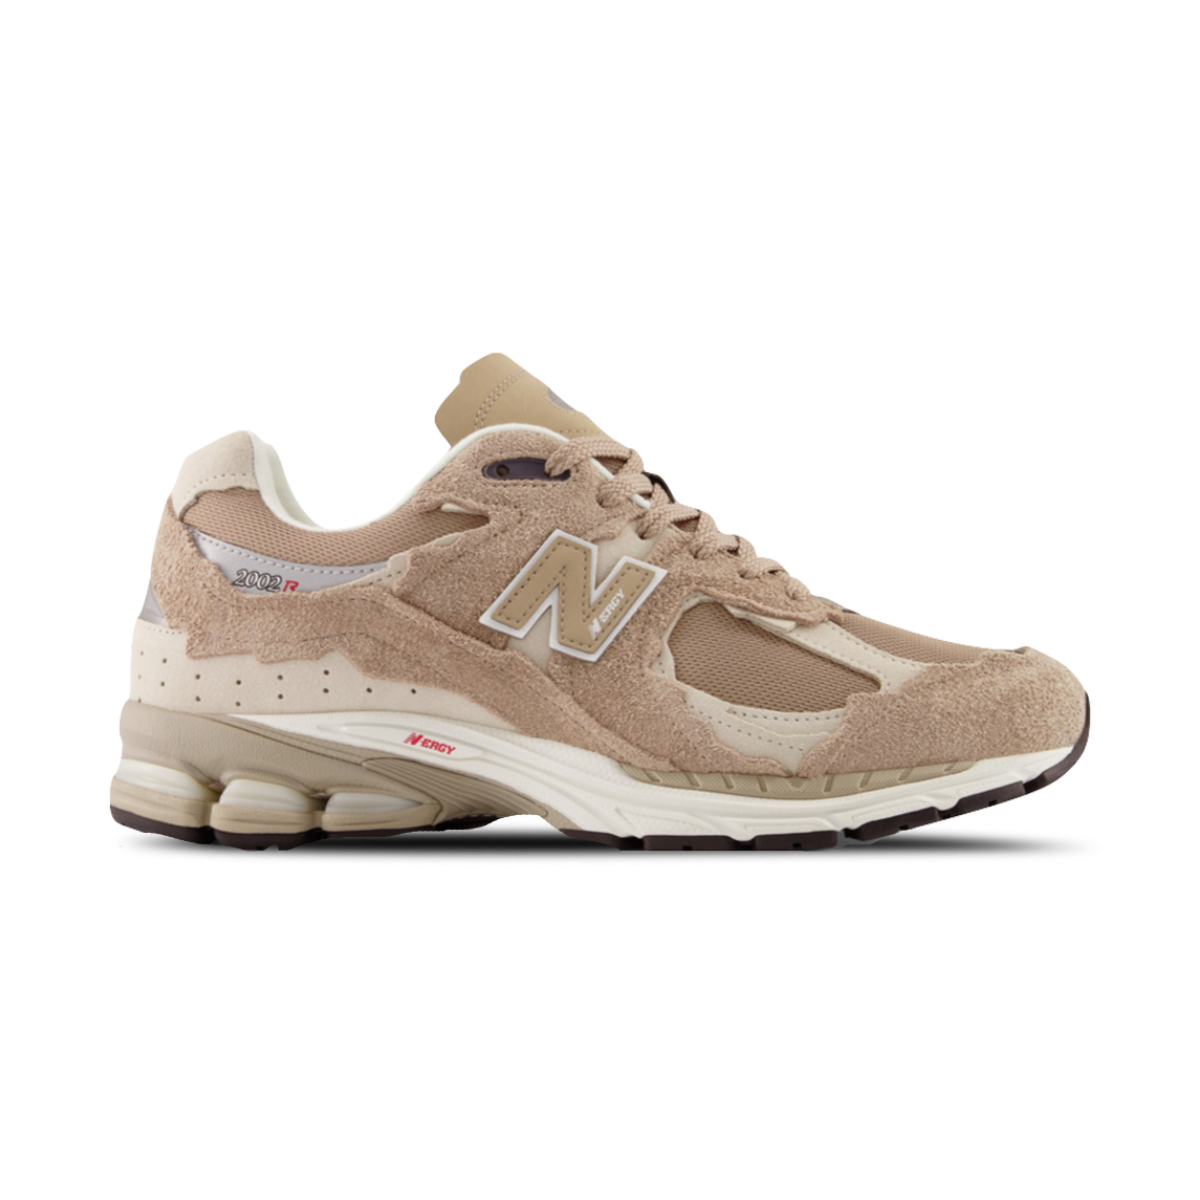 New Balance M2002RDL 'Protection Pack' Driftwood/ Timber Wolf